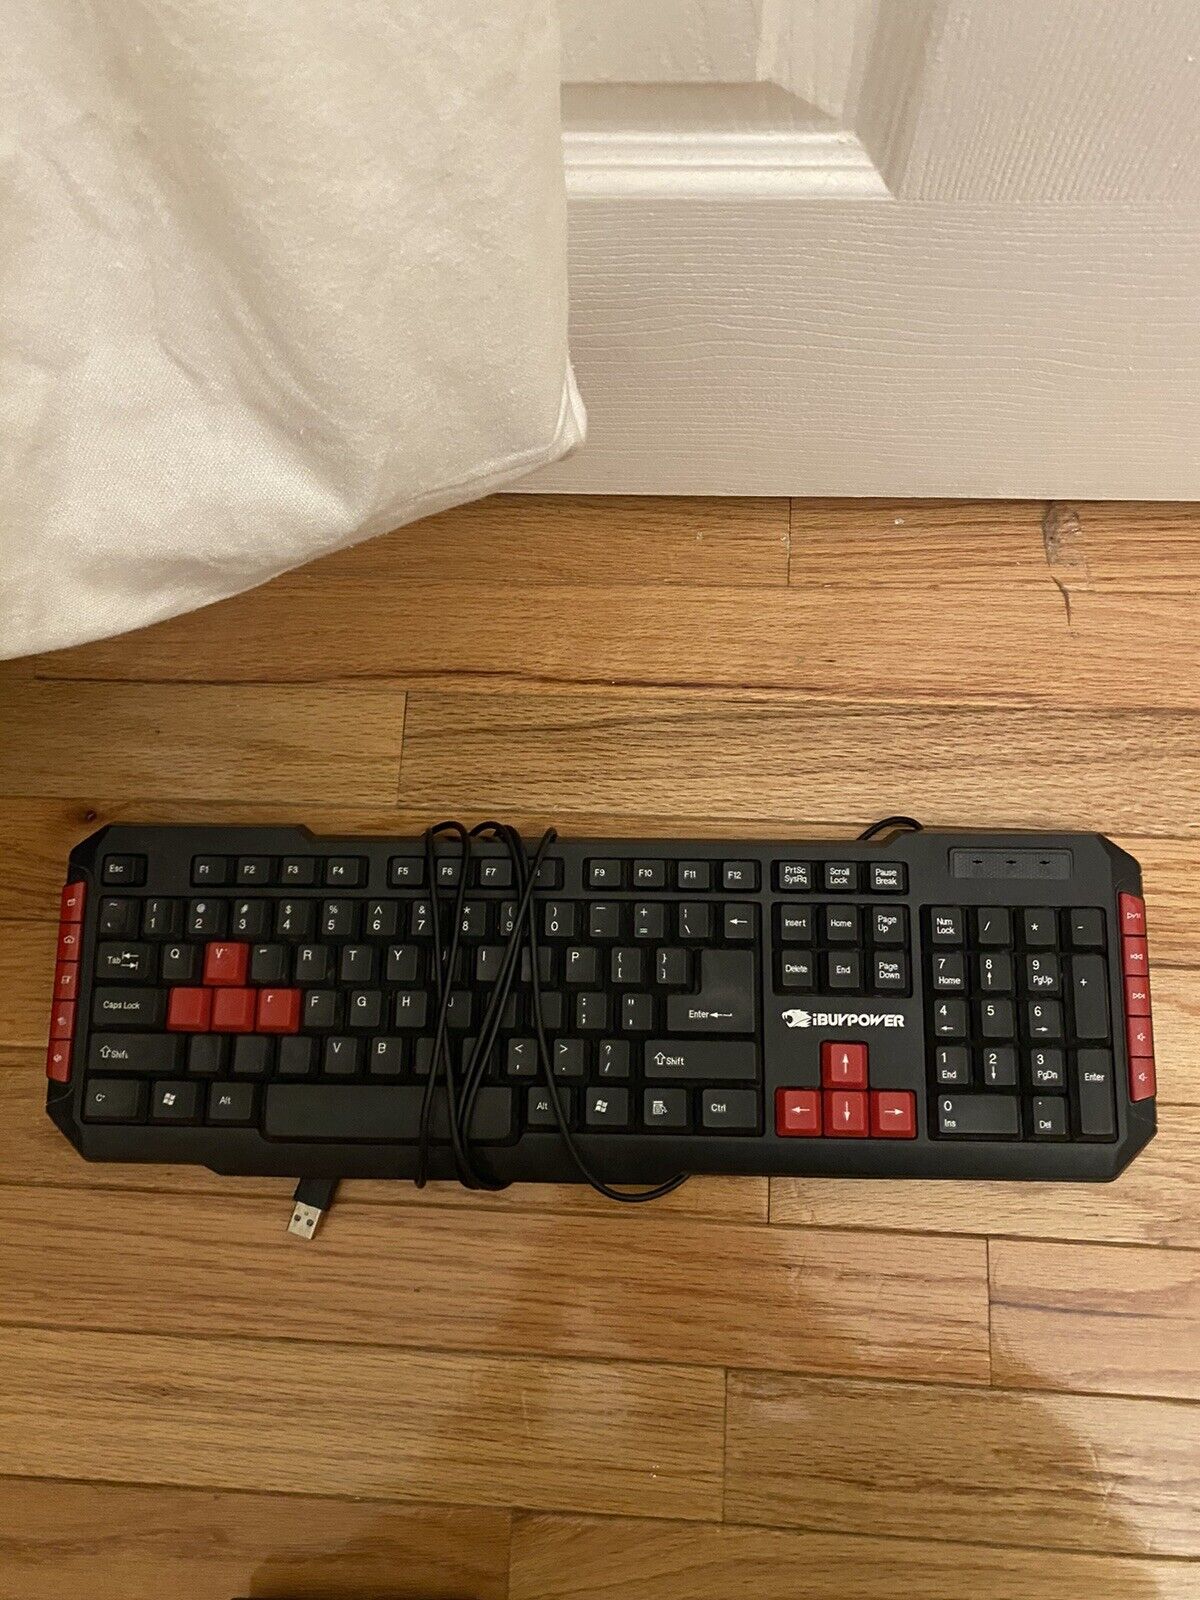 I Buy Power Black And Red Use Keyboard